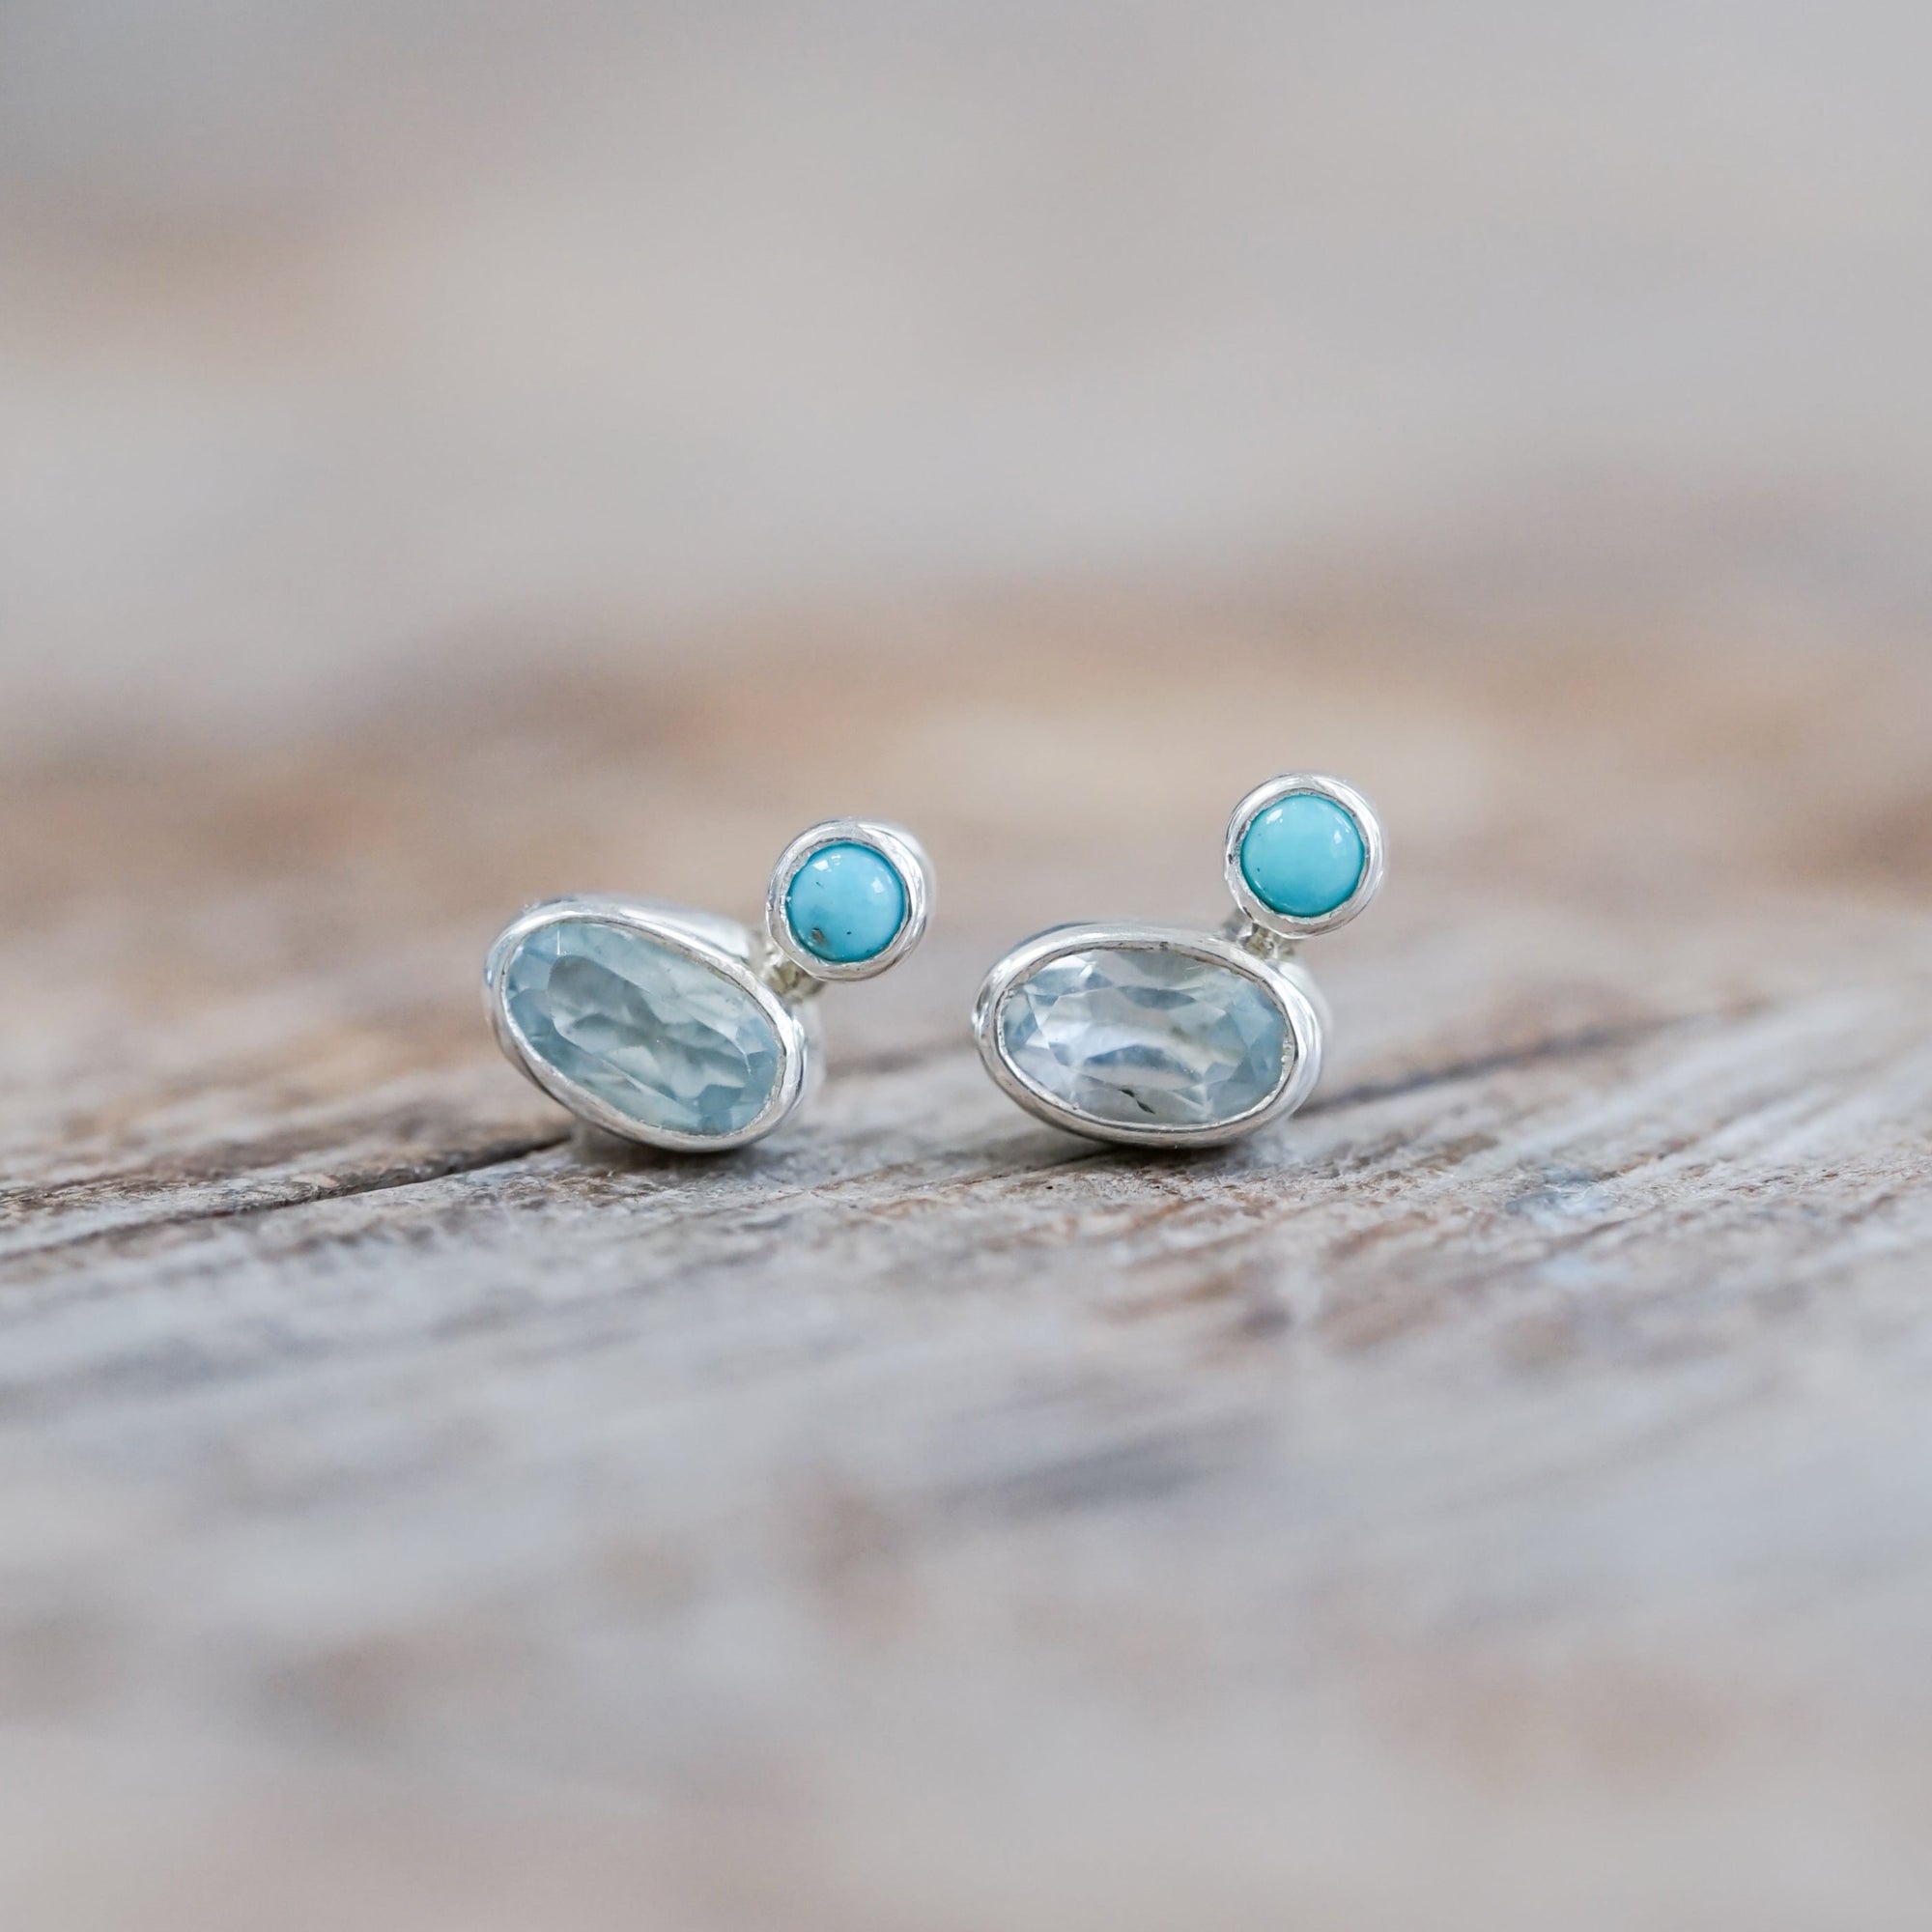 Oval Topaz and Round Turquoise Earrings - Gardens of the Sun | Ethical Jewelry